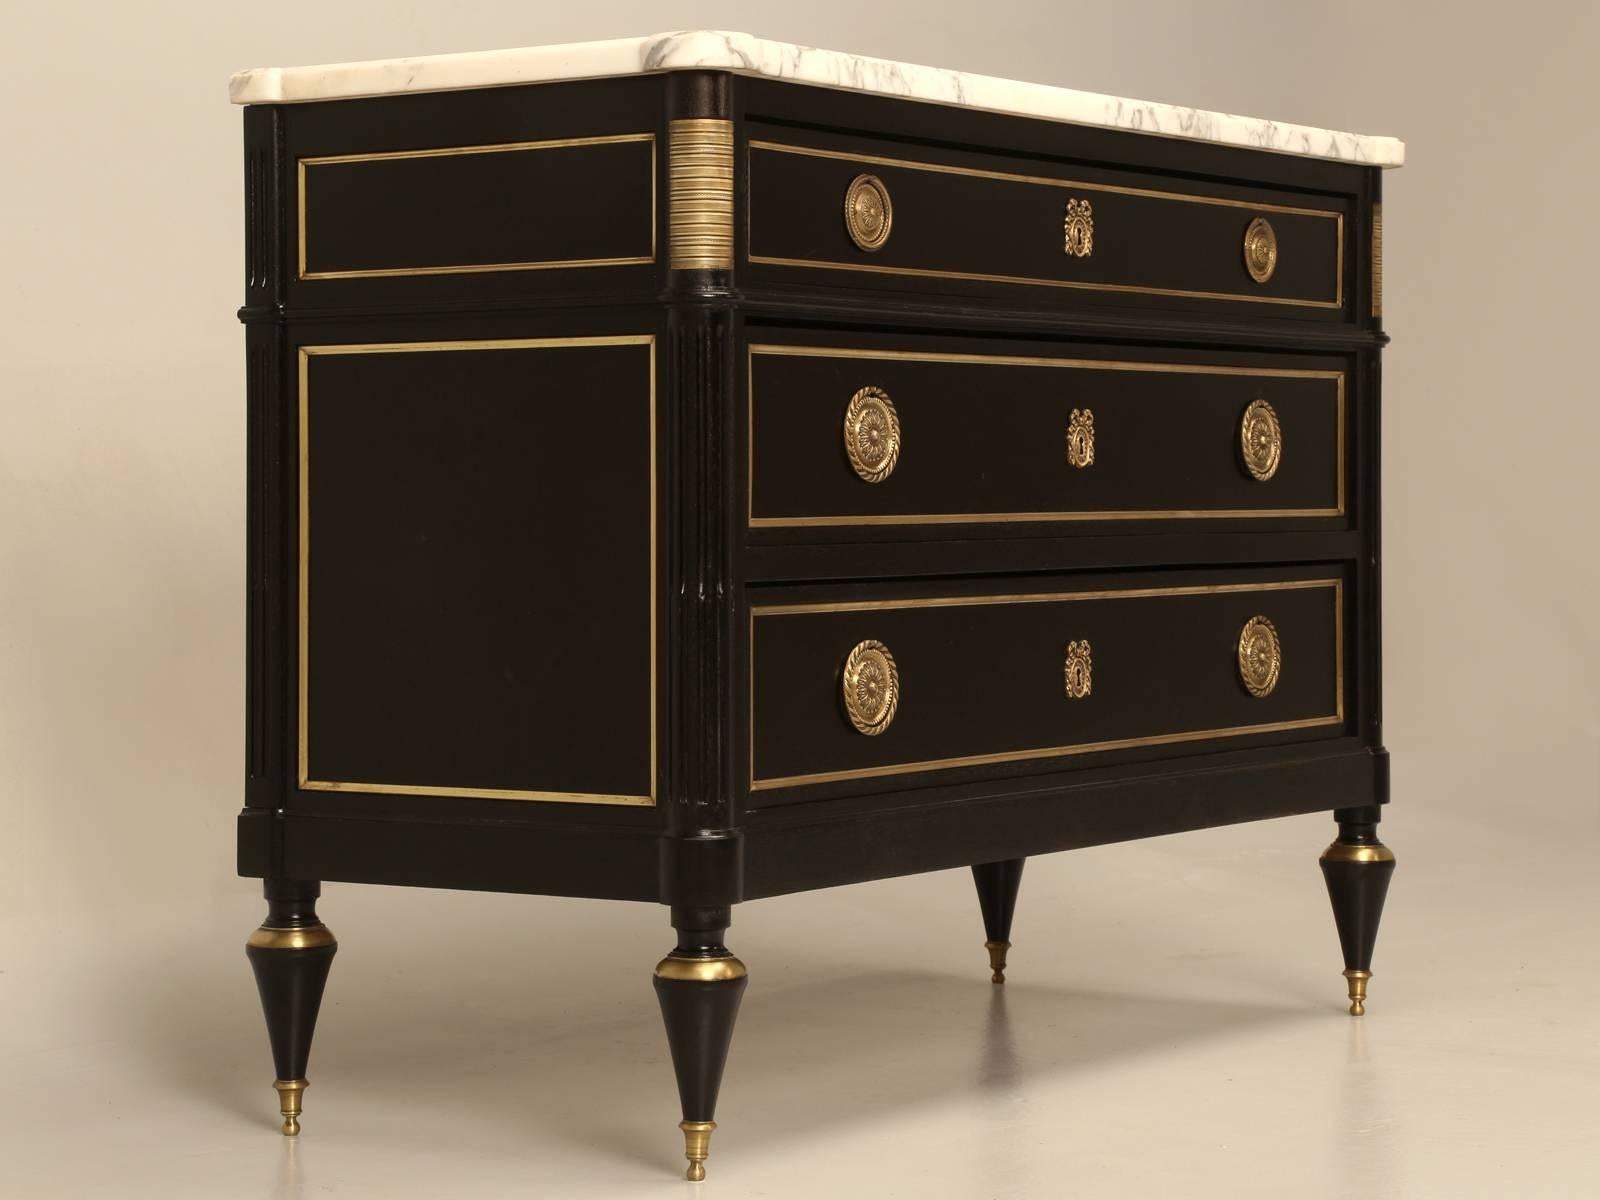 Antique French Louis XVI style commode that our old plank restoration department completely restored from the bottom up, including hand-stripping, without the use of chemicals and finishing with a proper ebonized finish which allows for the grain of